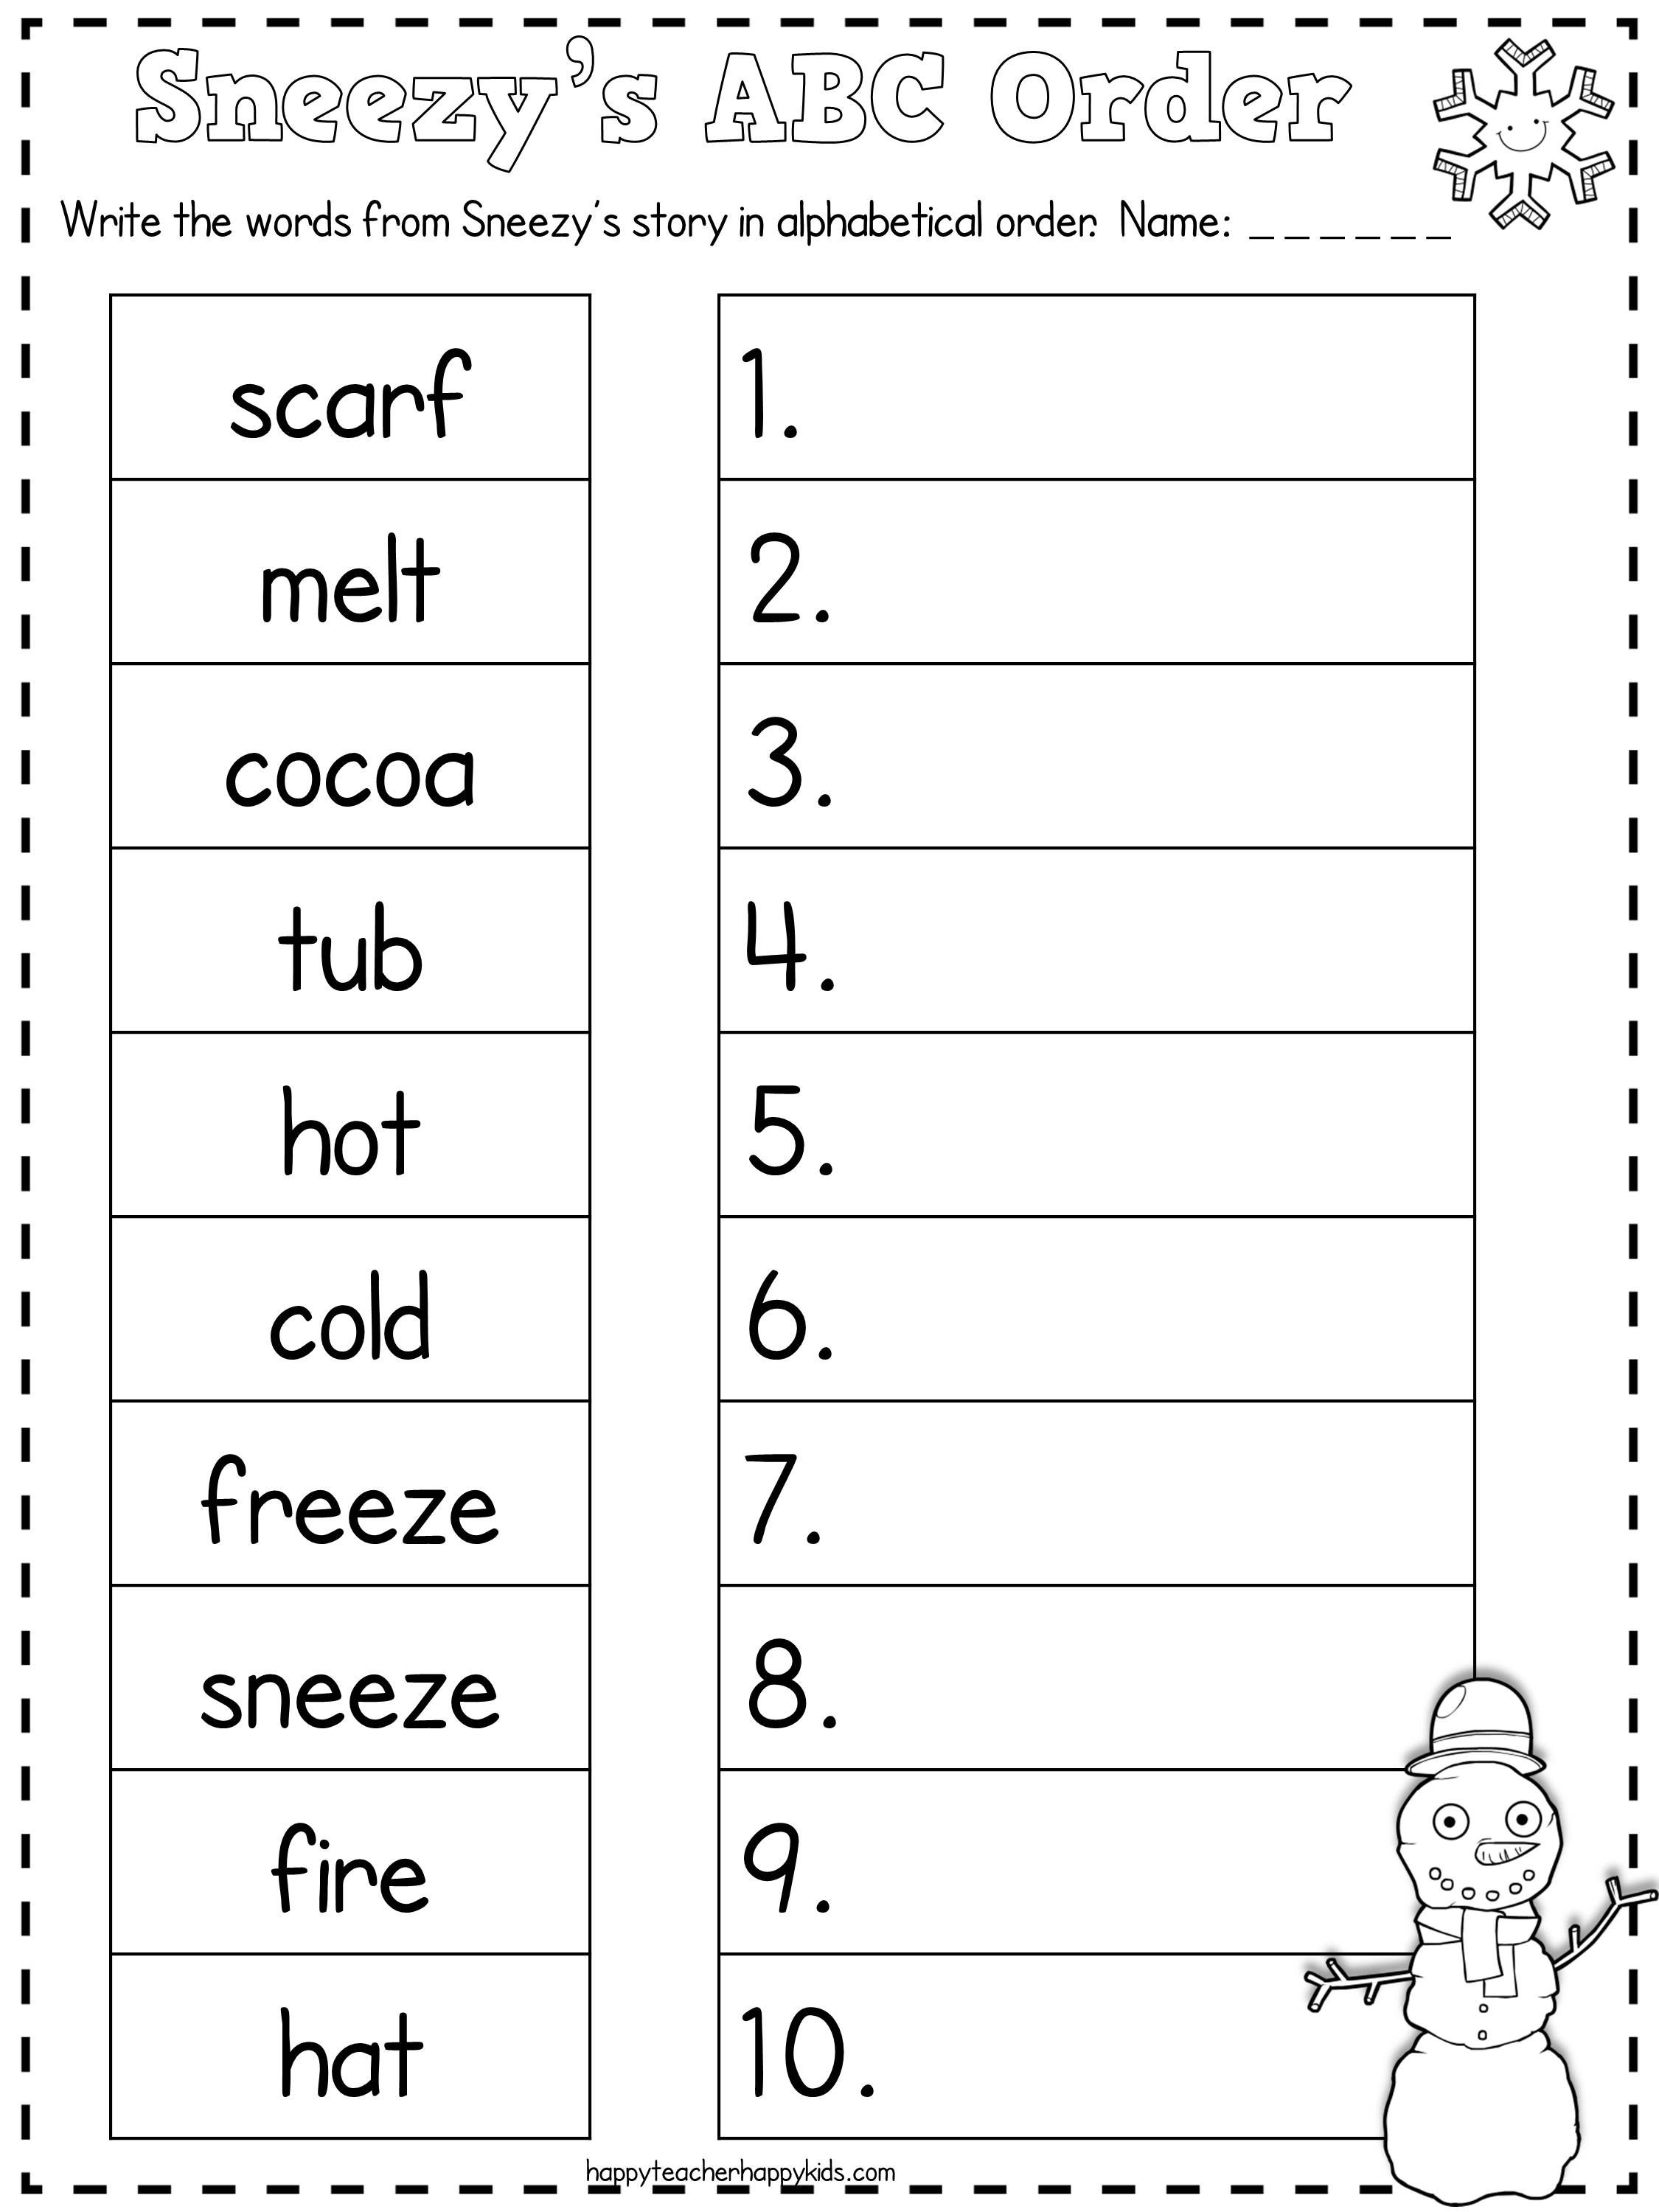 Free Sneezy The Snowman Abc Order &amp;amp; Math Secret Code Activities | Printable Abc Order Worksheets